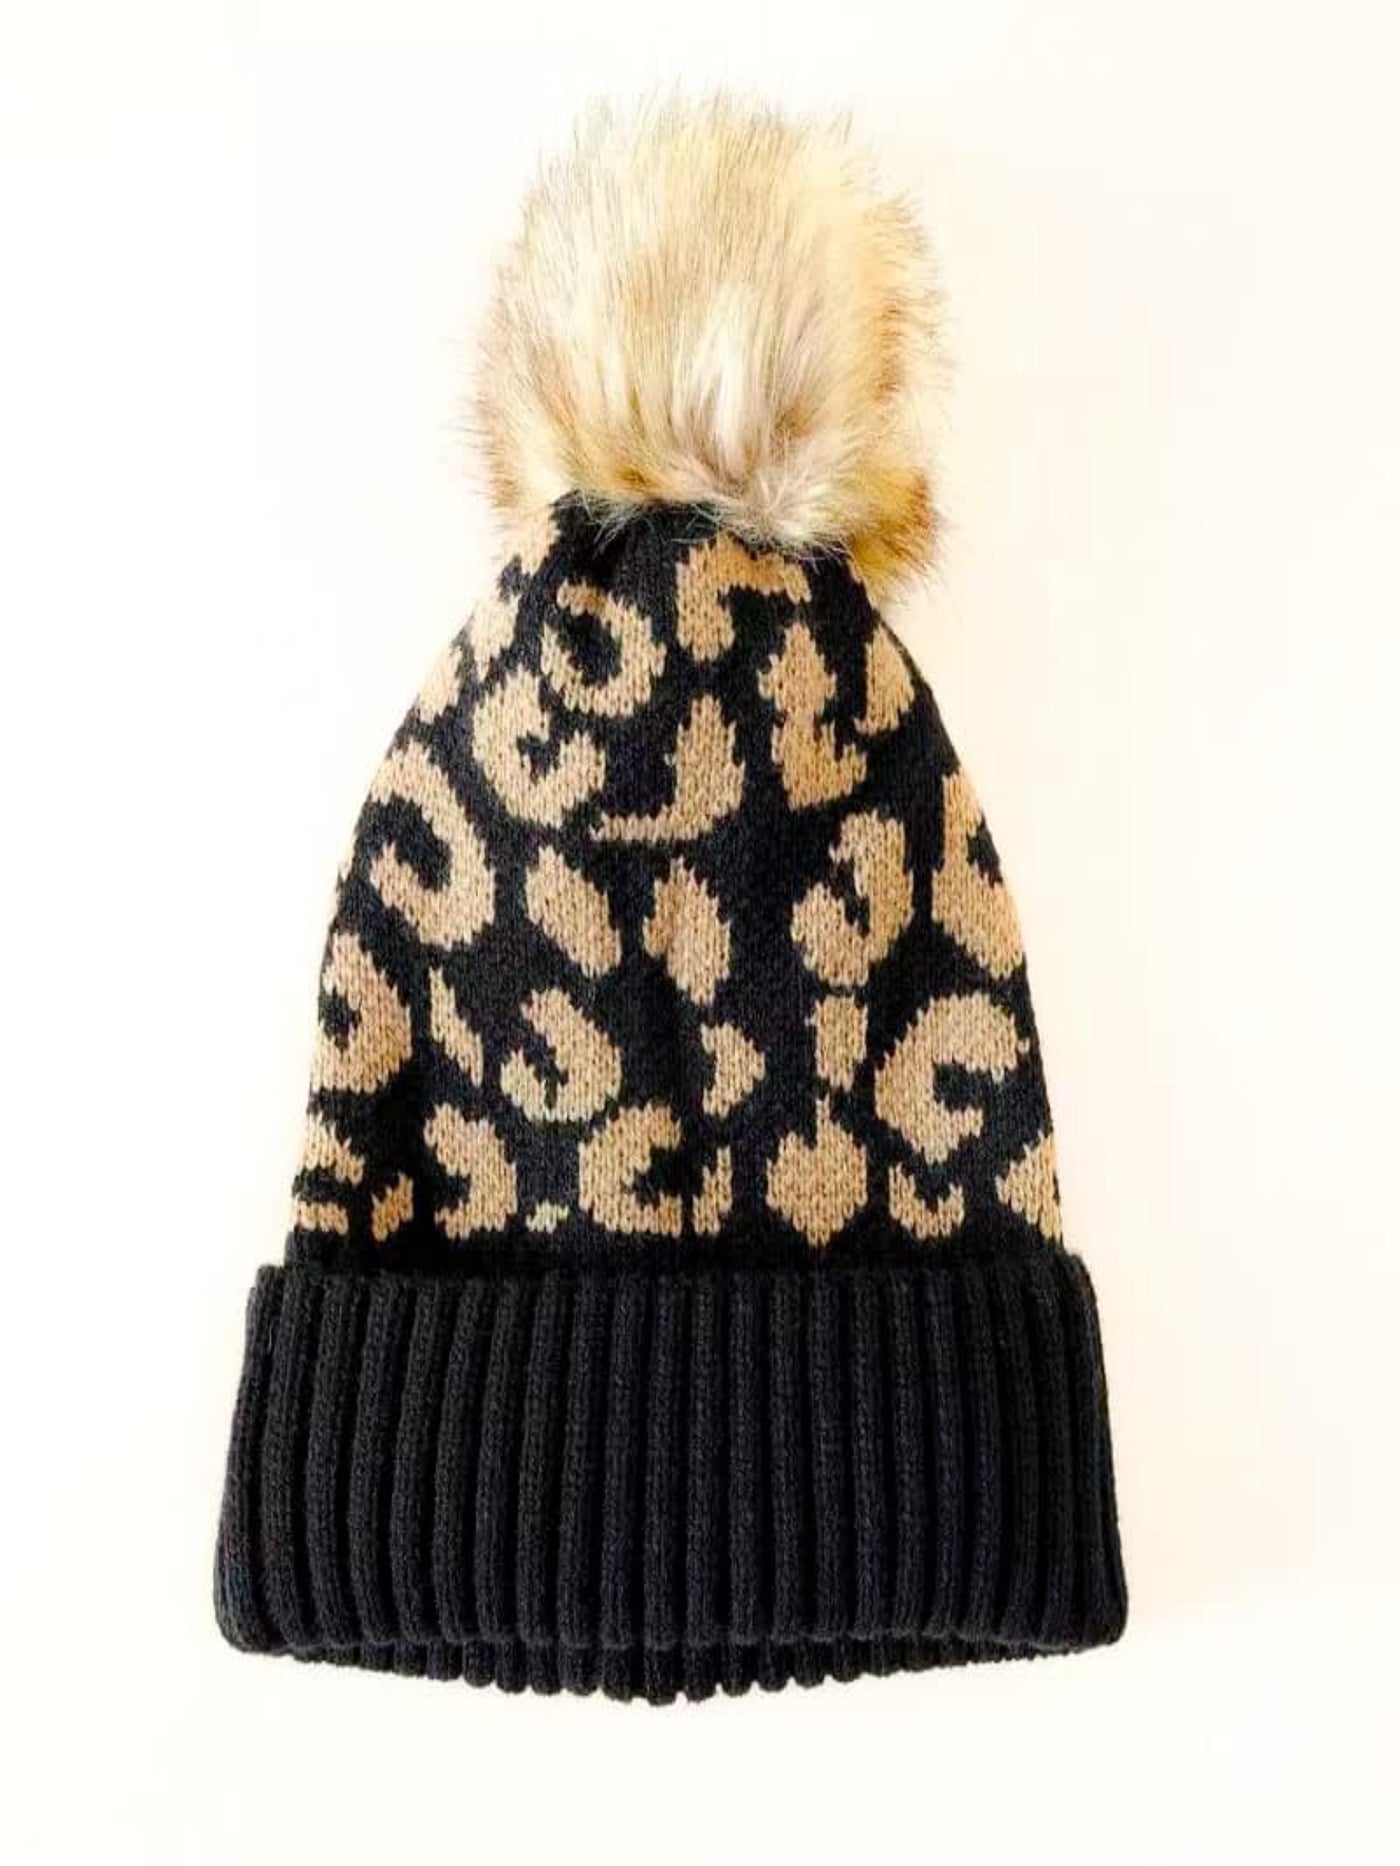 The Lala Knit Animal Print Cuff Beanie with Faux Fur Pom Detail, Black